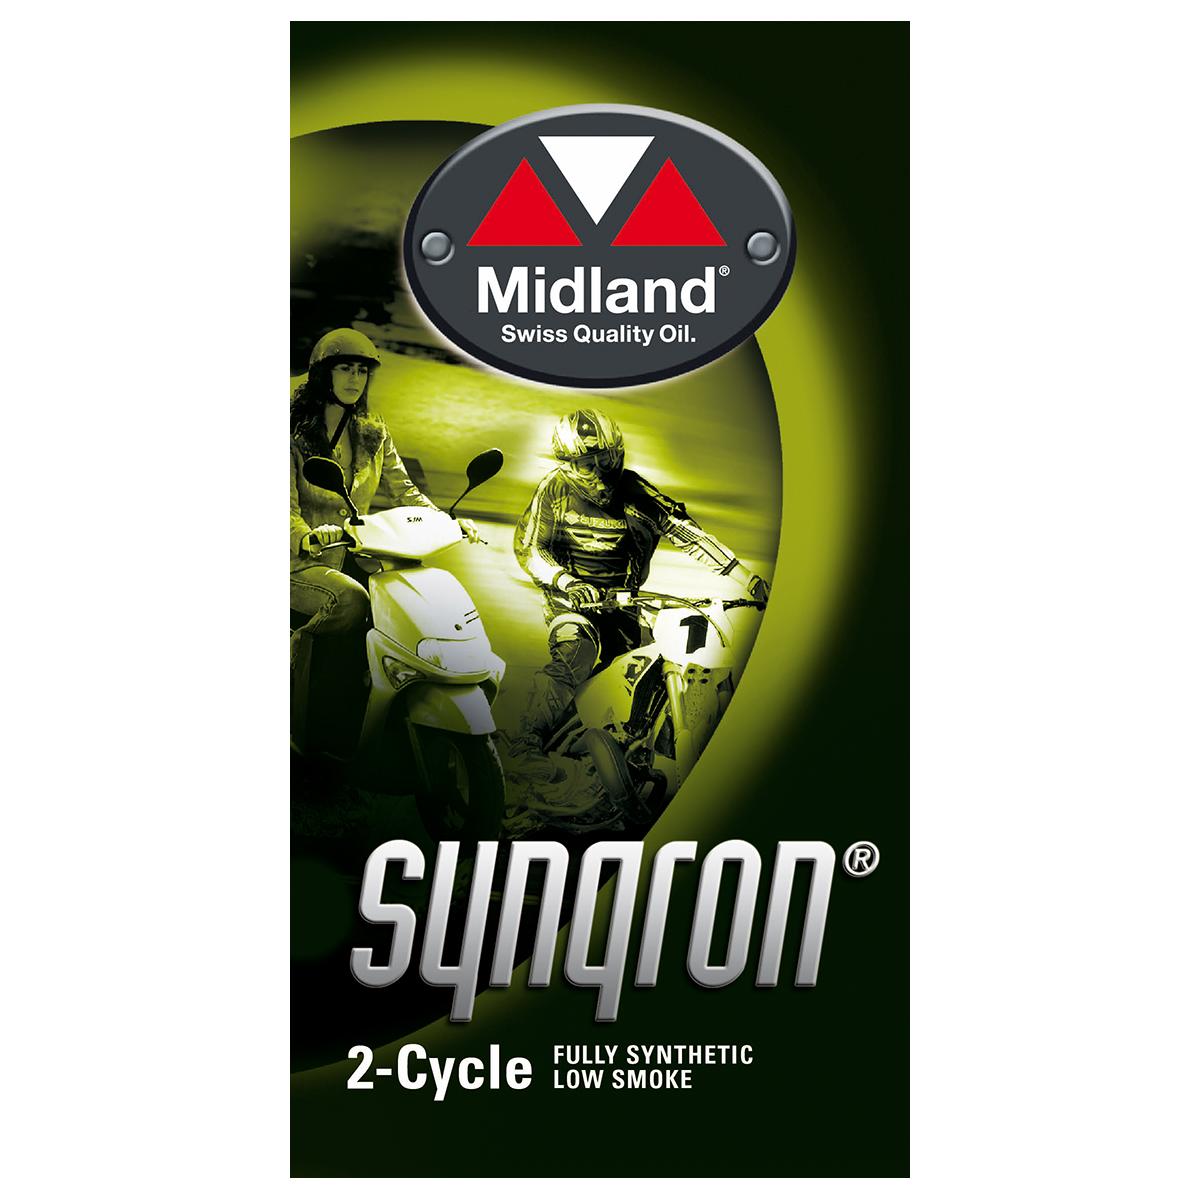 Synqron 2-Cycle